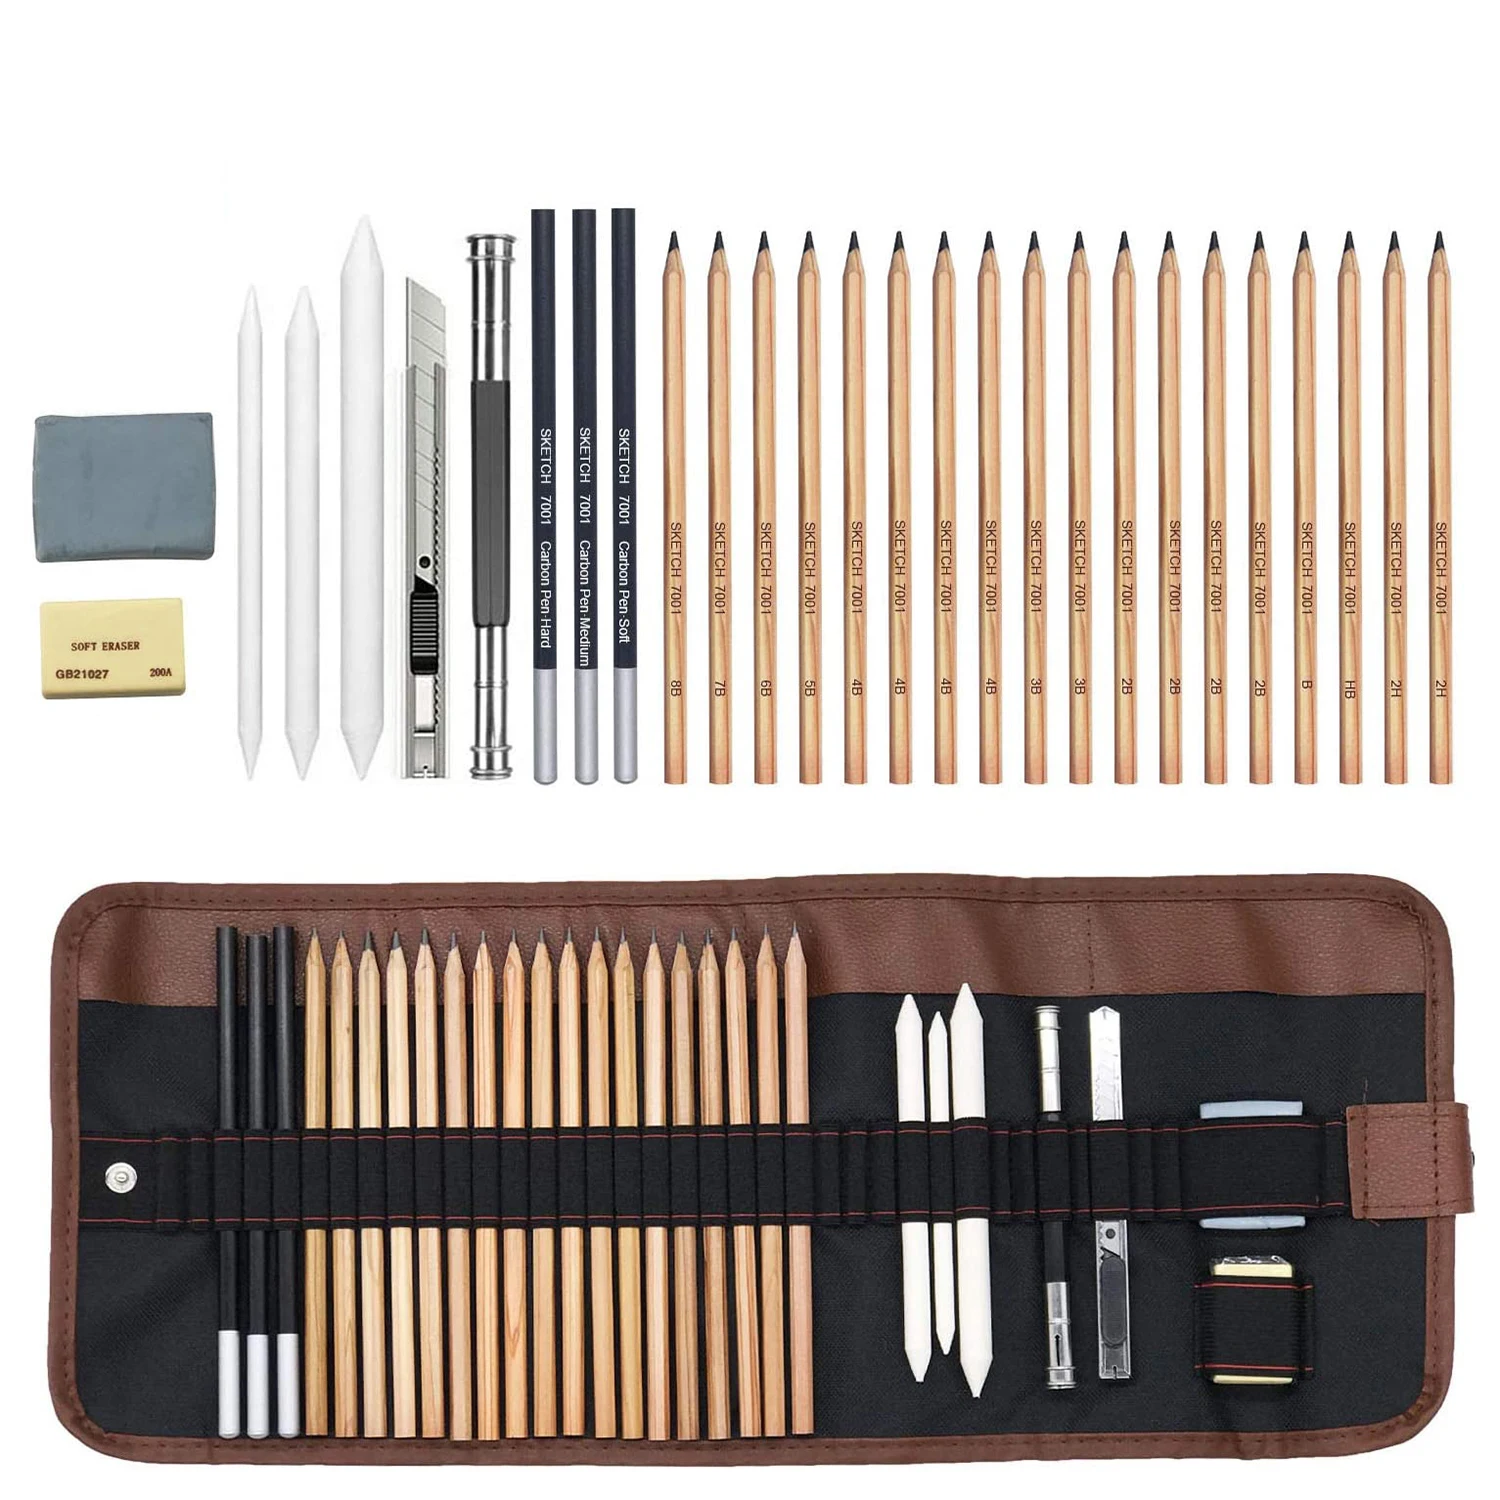 

30pcs/set Sketching Pencils Set,Drawing Pencils Drawing and Sketch Kit, with Charcoal Pencil, Eraser, Pen Knife,Pencil Extender